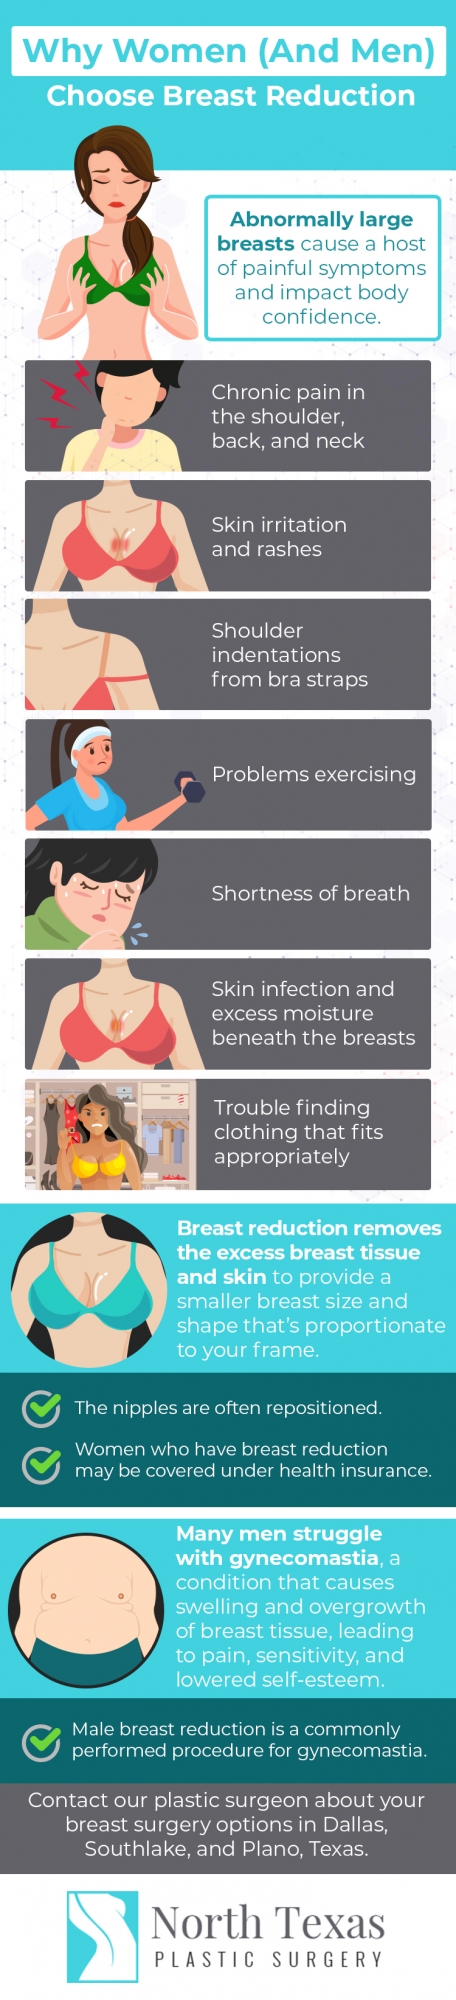 6 Common Health Issues Caused by Overly Large Breasts & How to